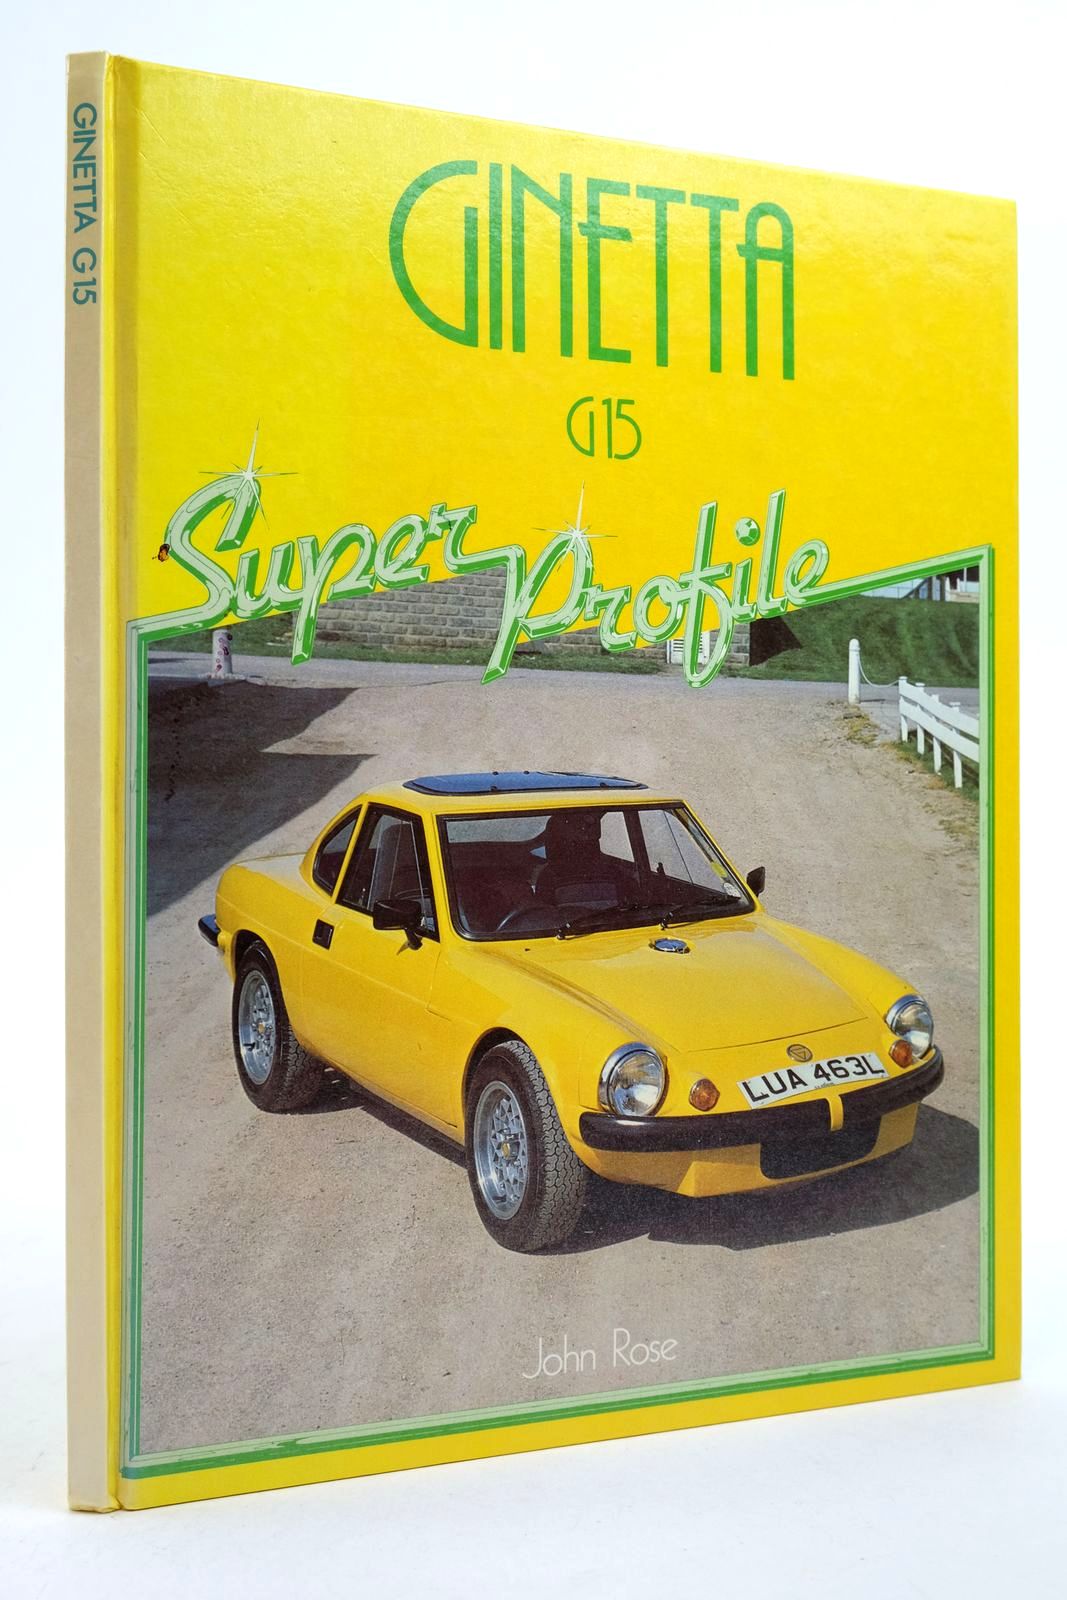 Photo of GINETTA G15 (SUPER PROFILE) written by Rose, John published by Haynes Publishing Group (STOCK CODE: 2140230)  for sale by Stella & Rose's Books